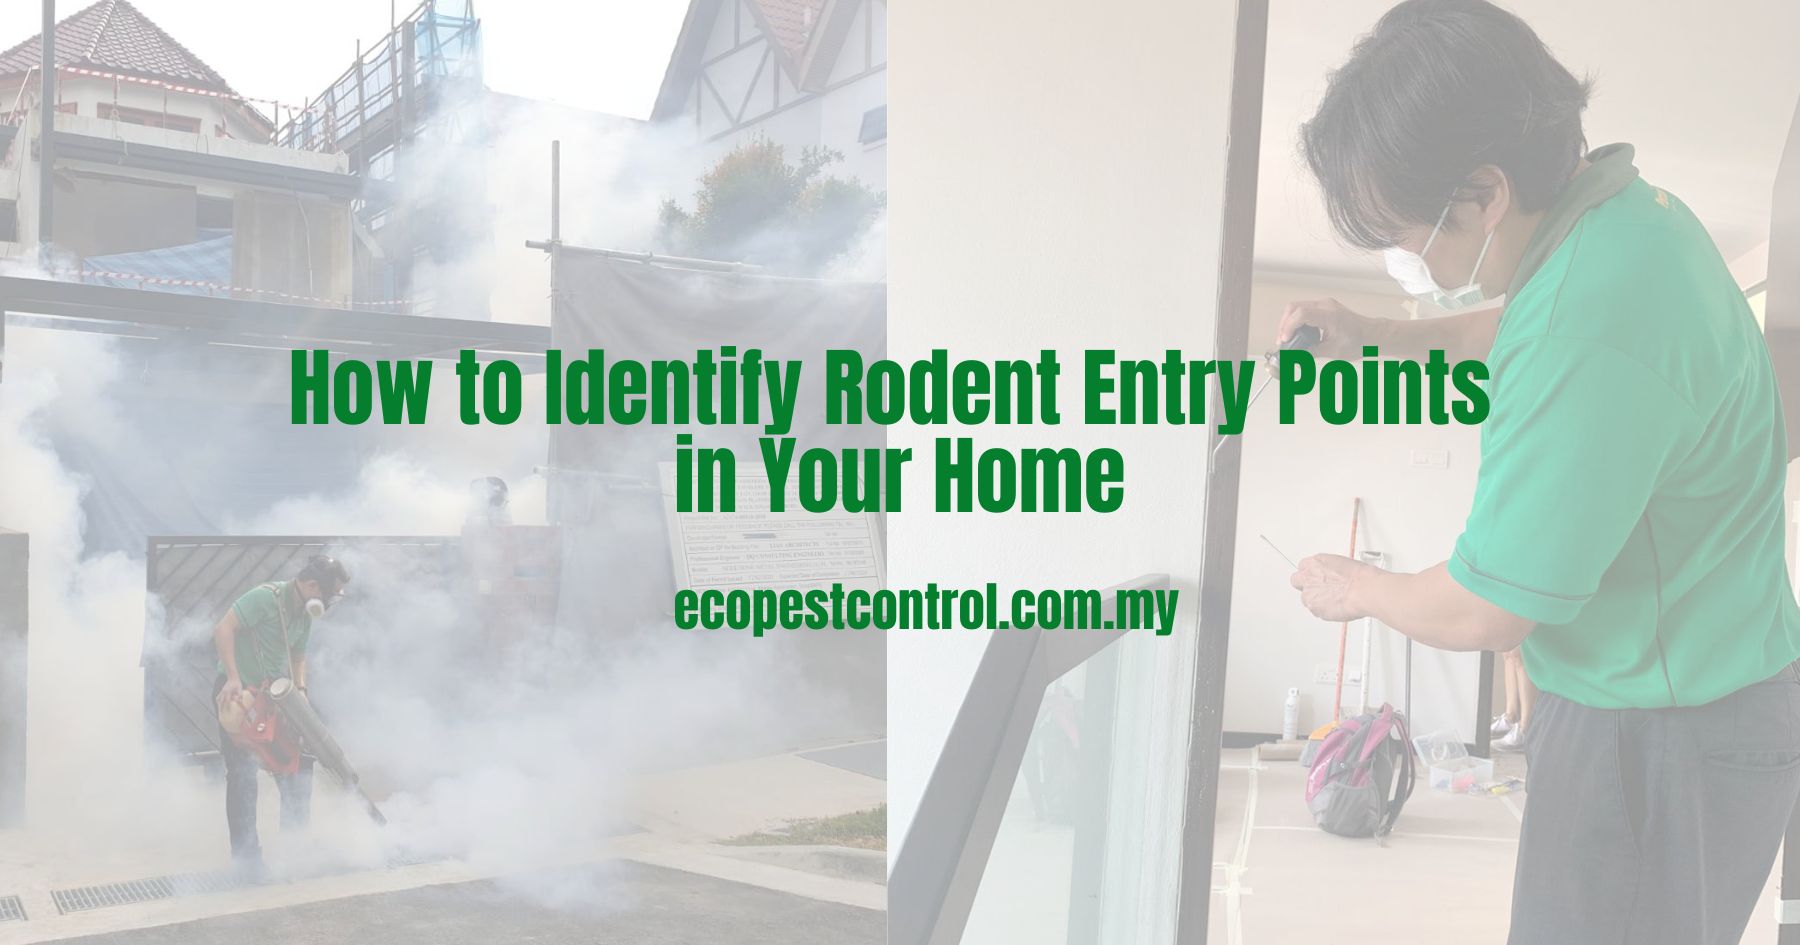 How to Identify Rodent Entry Points in Your Home